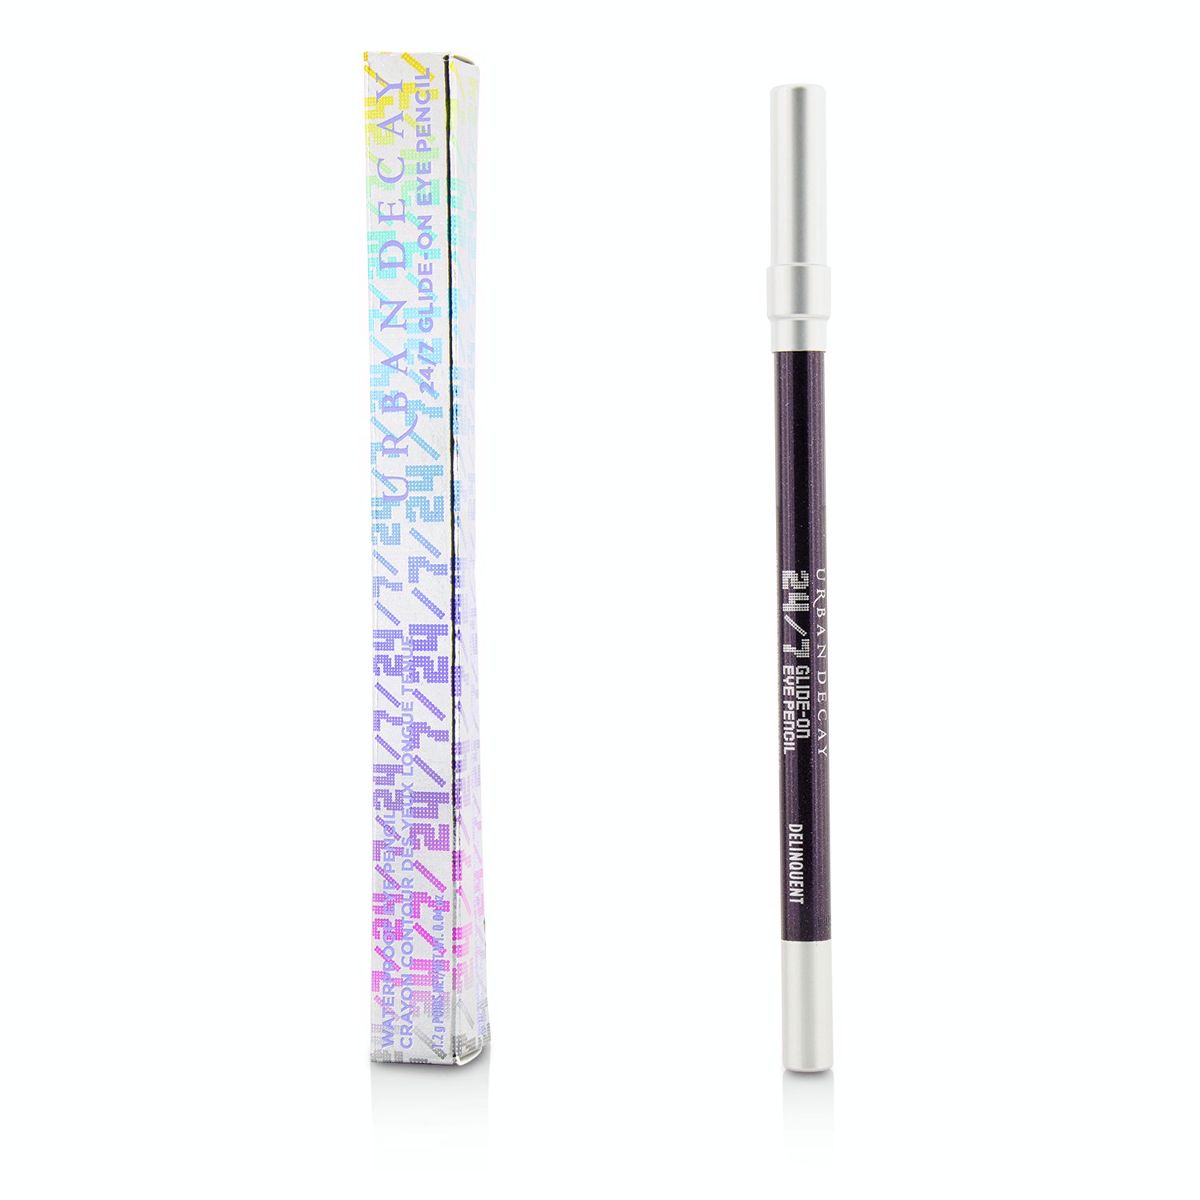 24/7 Glide On Waterproof Eye Pencil - Delinquent Urban Decay Image